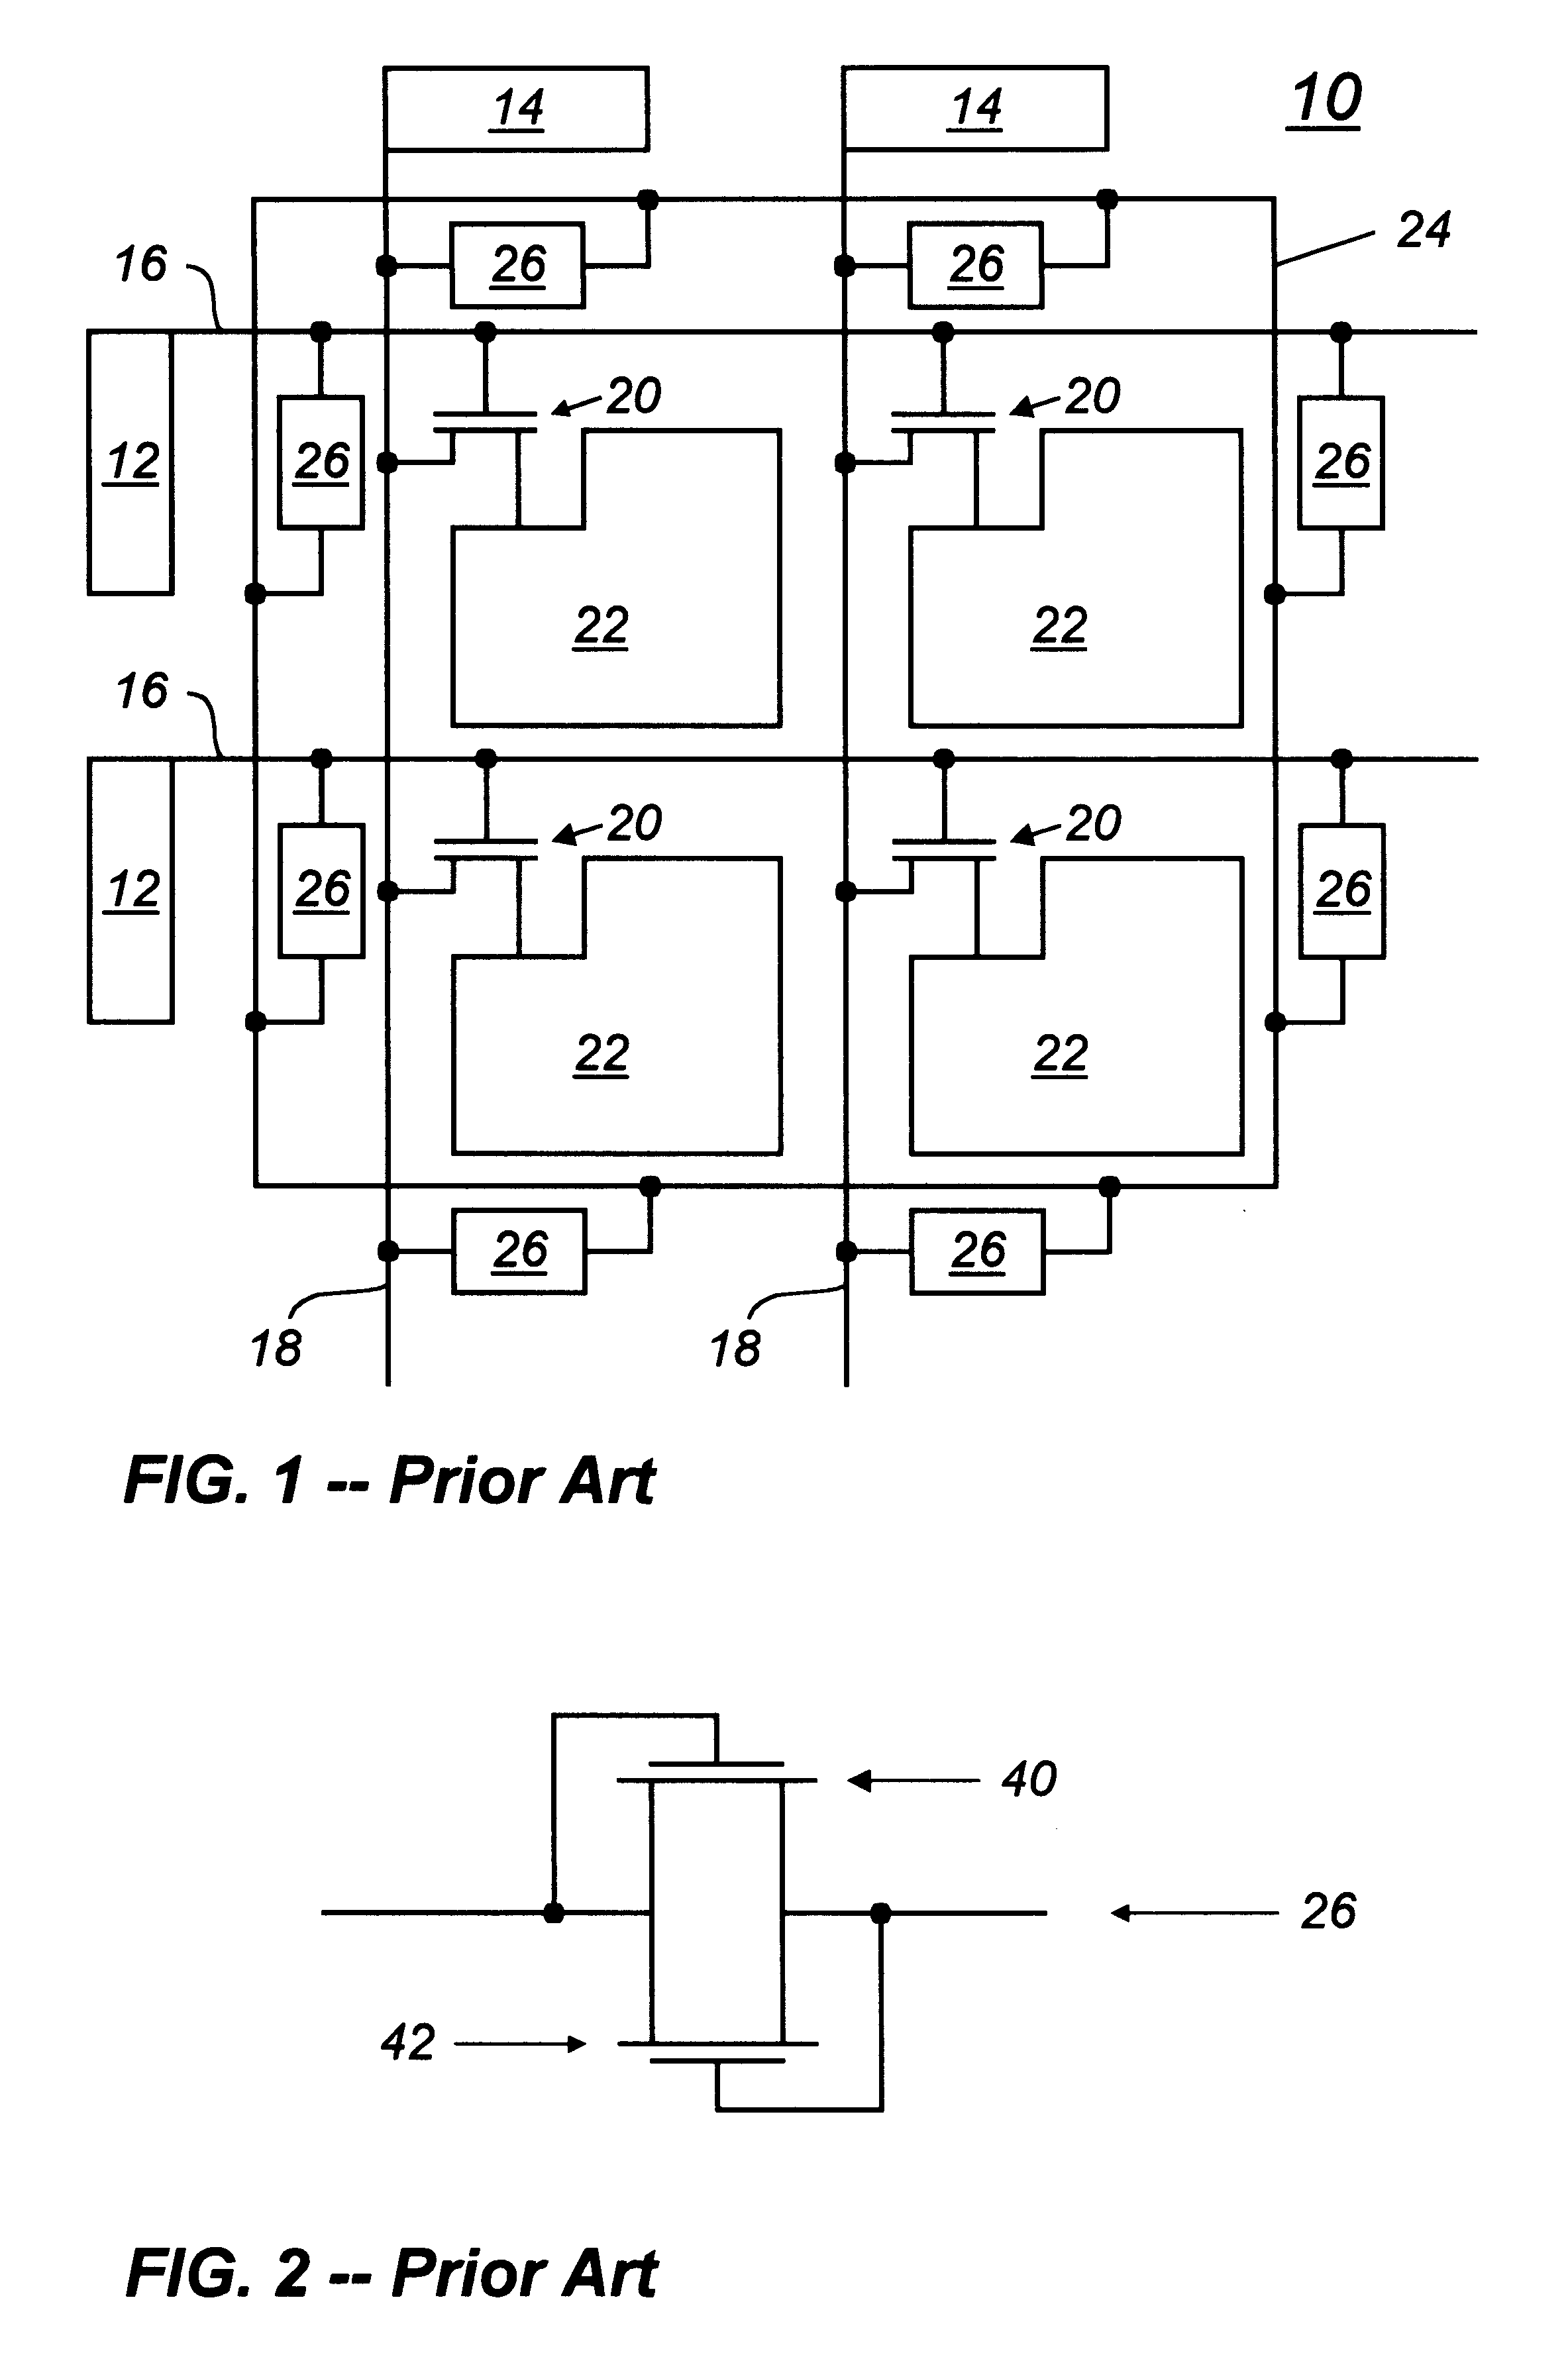 Capacitively coupled field effect transistors for electrostatic discharge protection in flat panel displays